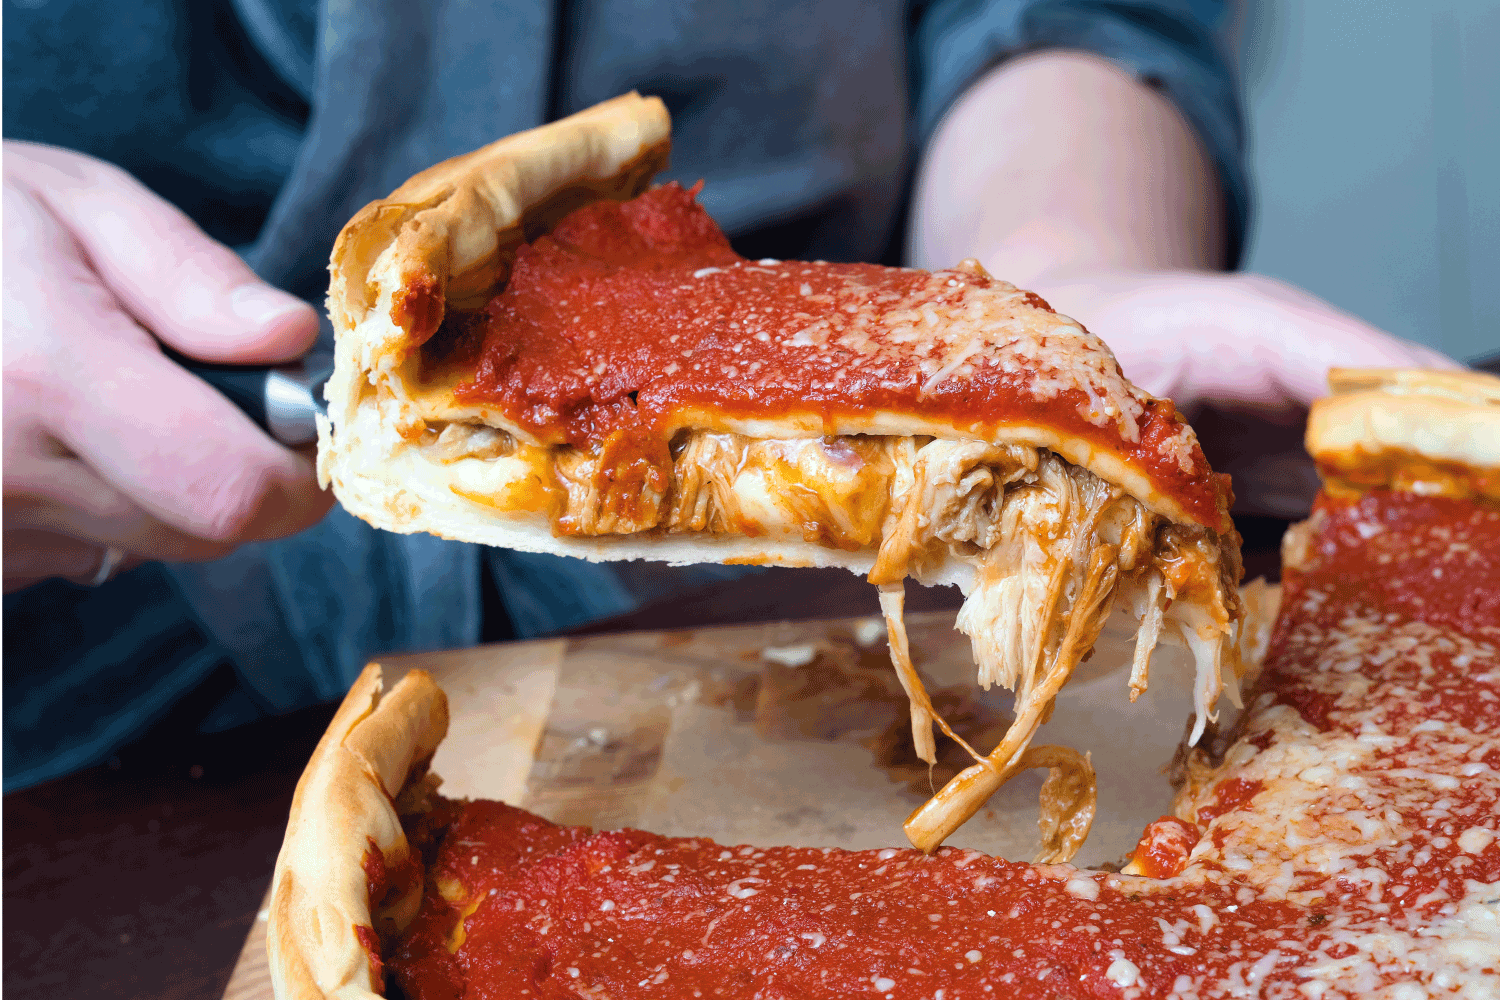 Woman hands cutting Chicago style deep dish Italian cheese pizza with tomato sauce and beef meet inside